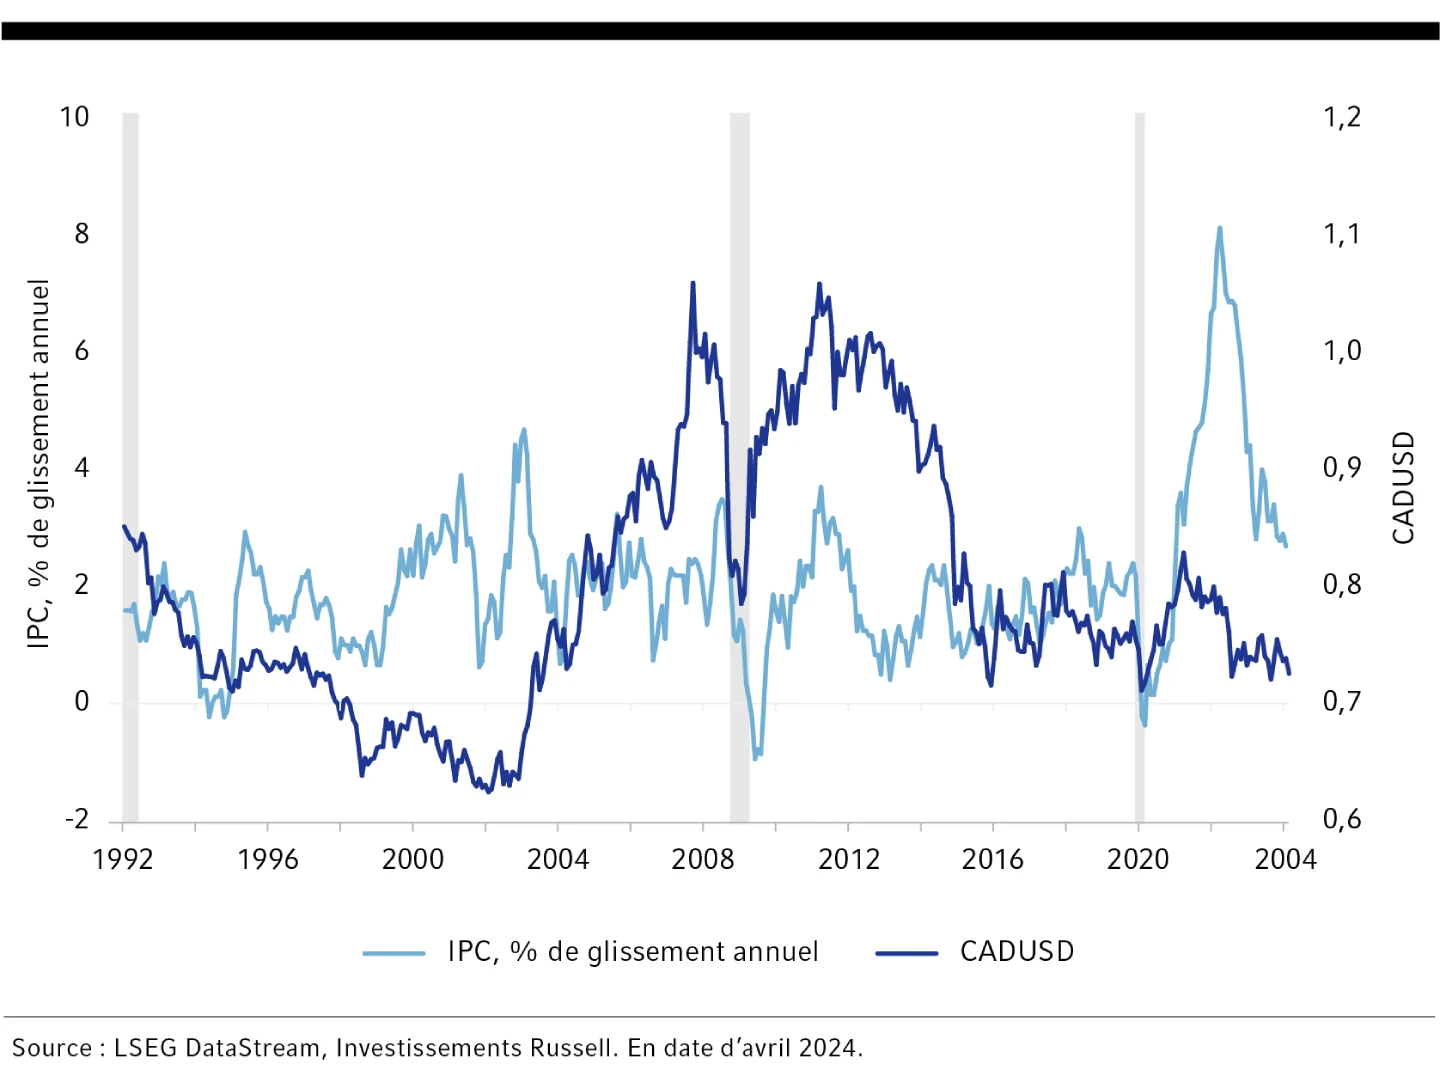 Chart 2: Inflation and CADUSD in recessionary environments” 